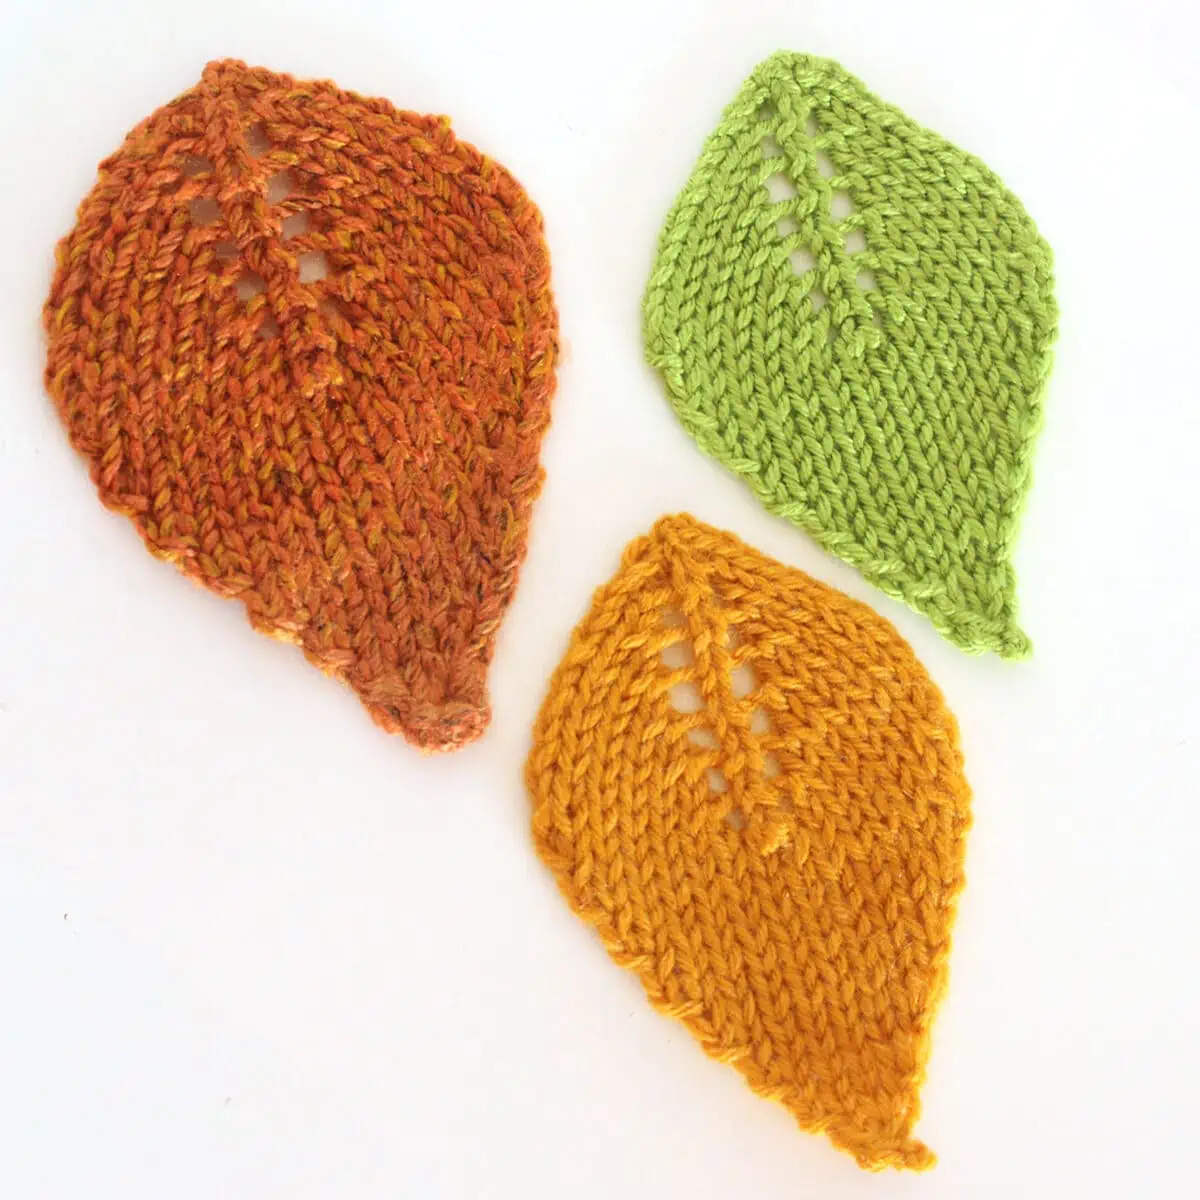 Three knitted leaf shapes.